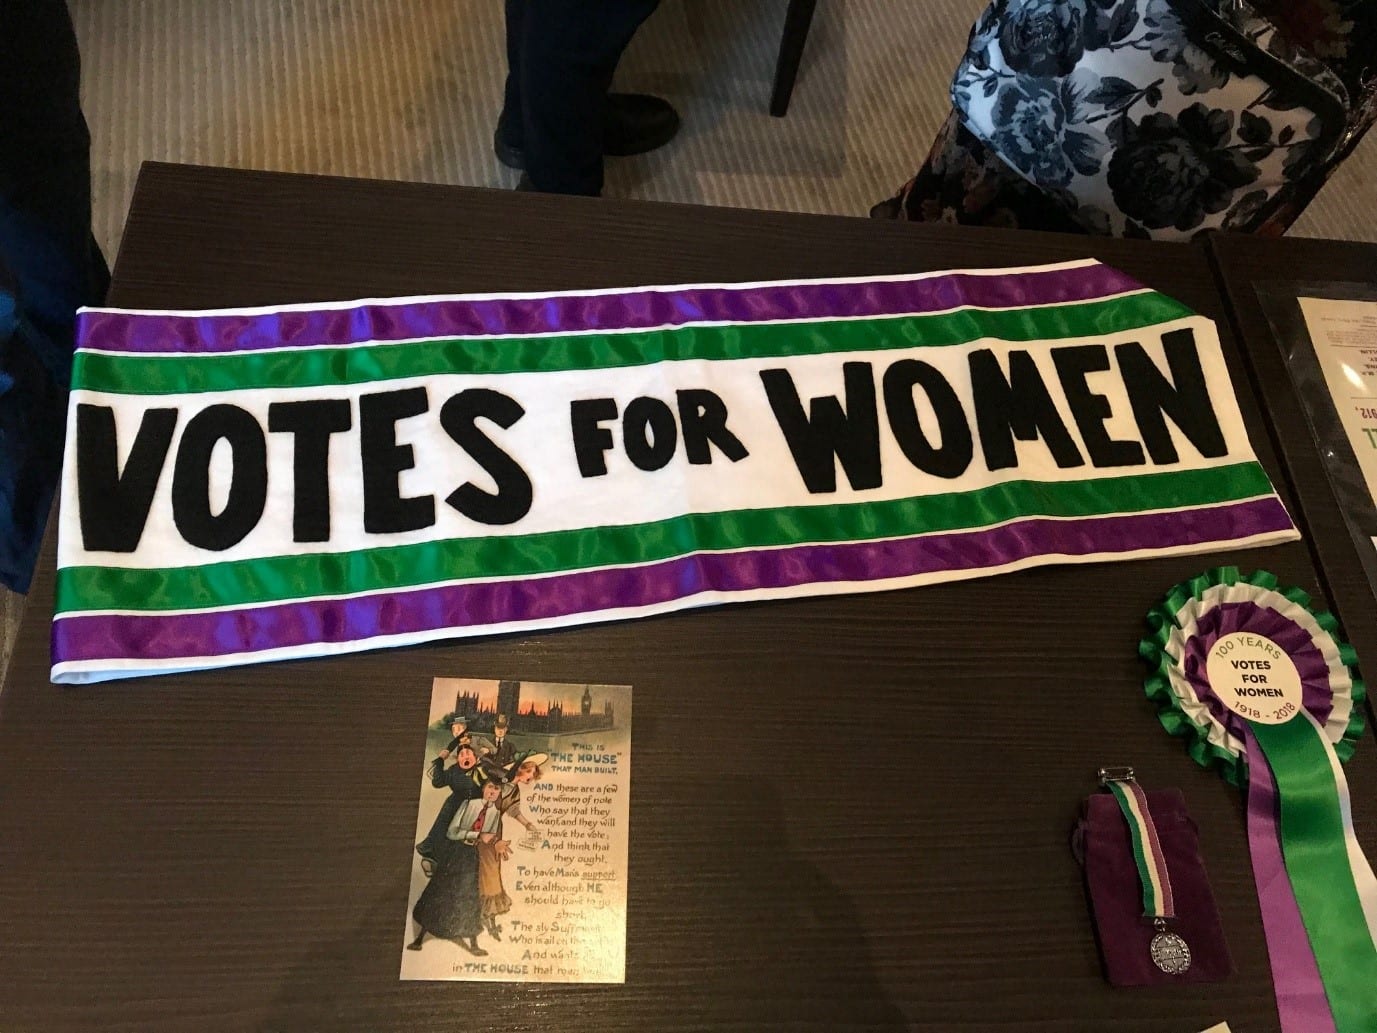 A selection of Votes for Women artefacts